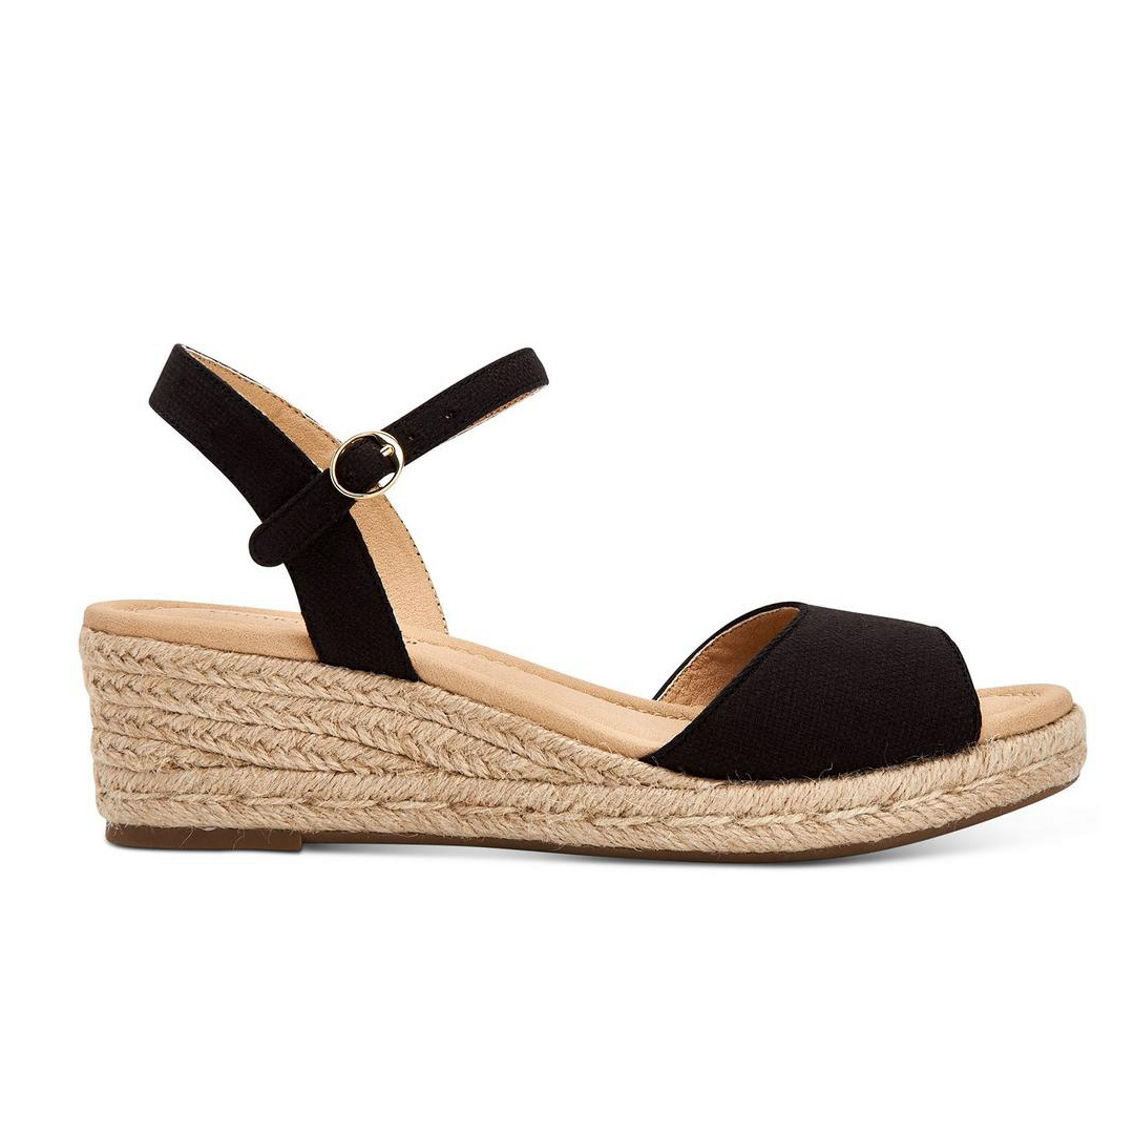 Luchia Womens Canvas Buckle Wedge Sandals - Image 2 of 5